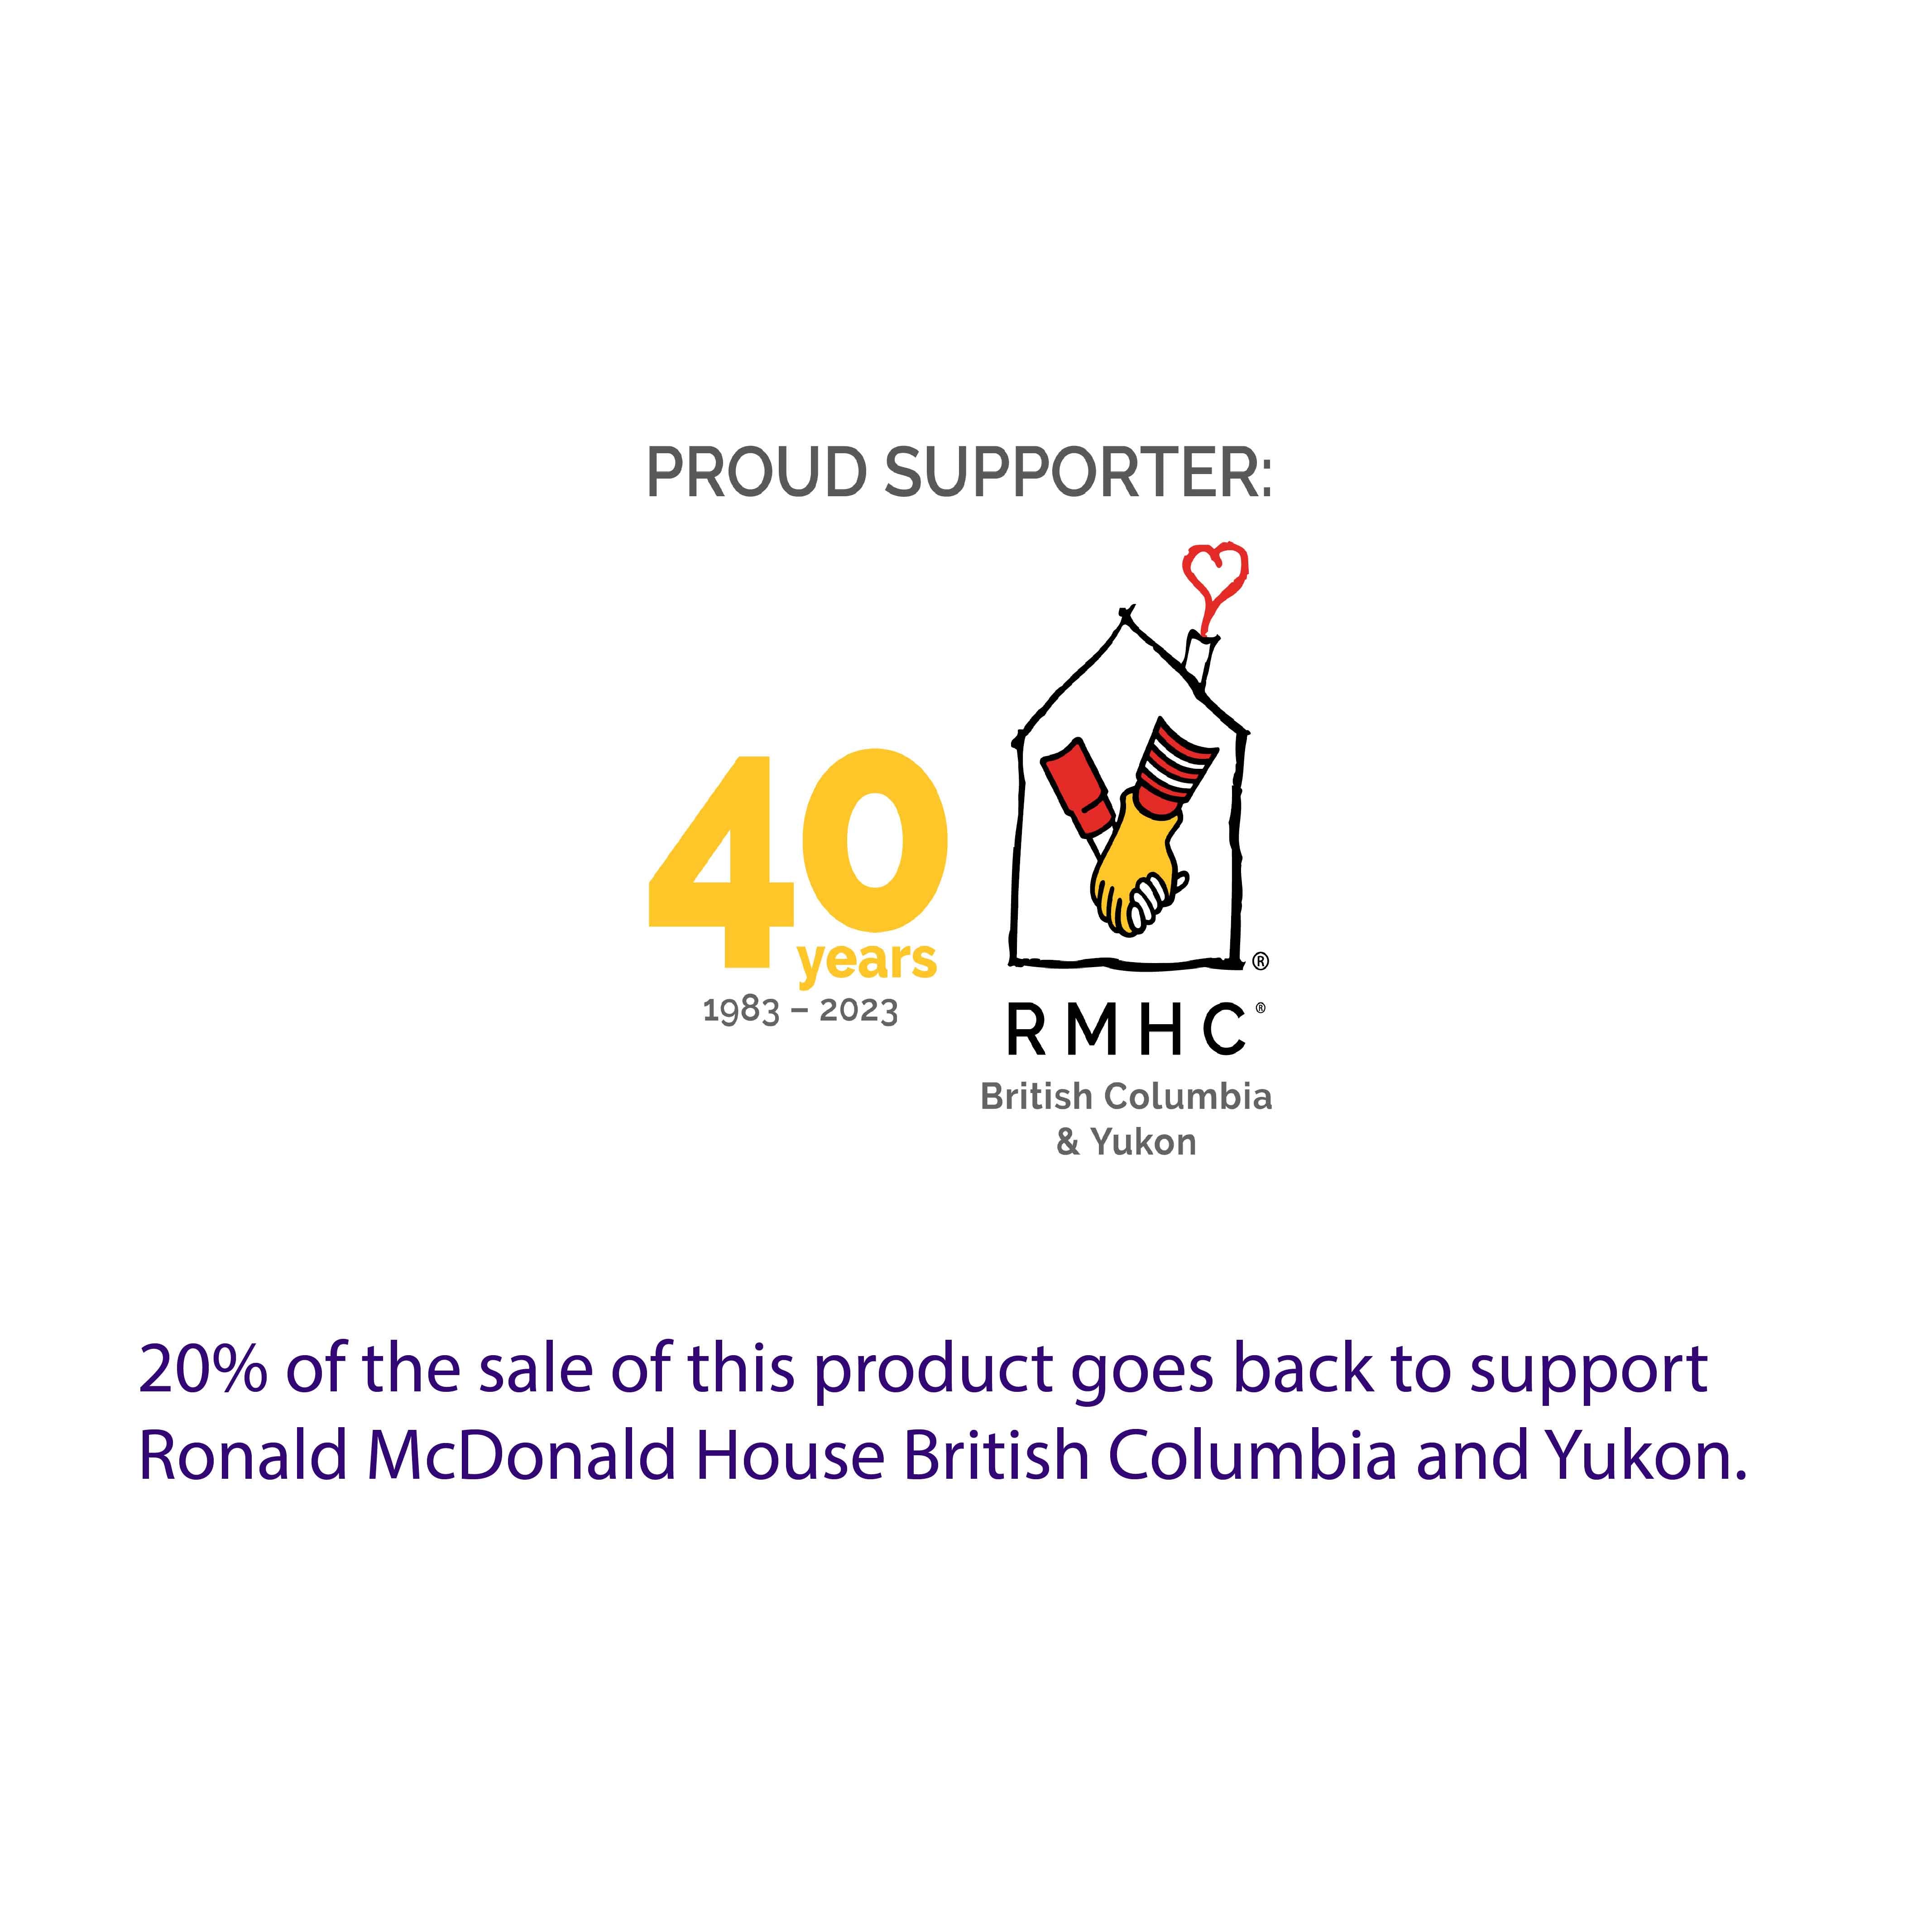 Logo of Ronald McDonald House British Columbia and Yukon - Loot Toy is a proud supporter